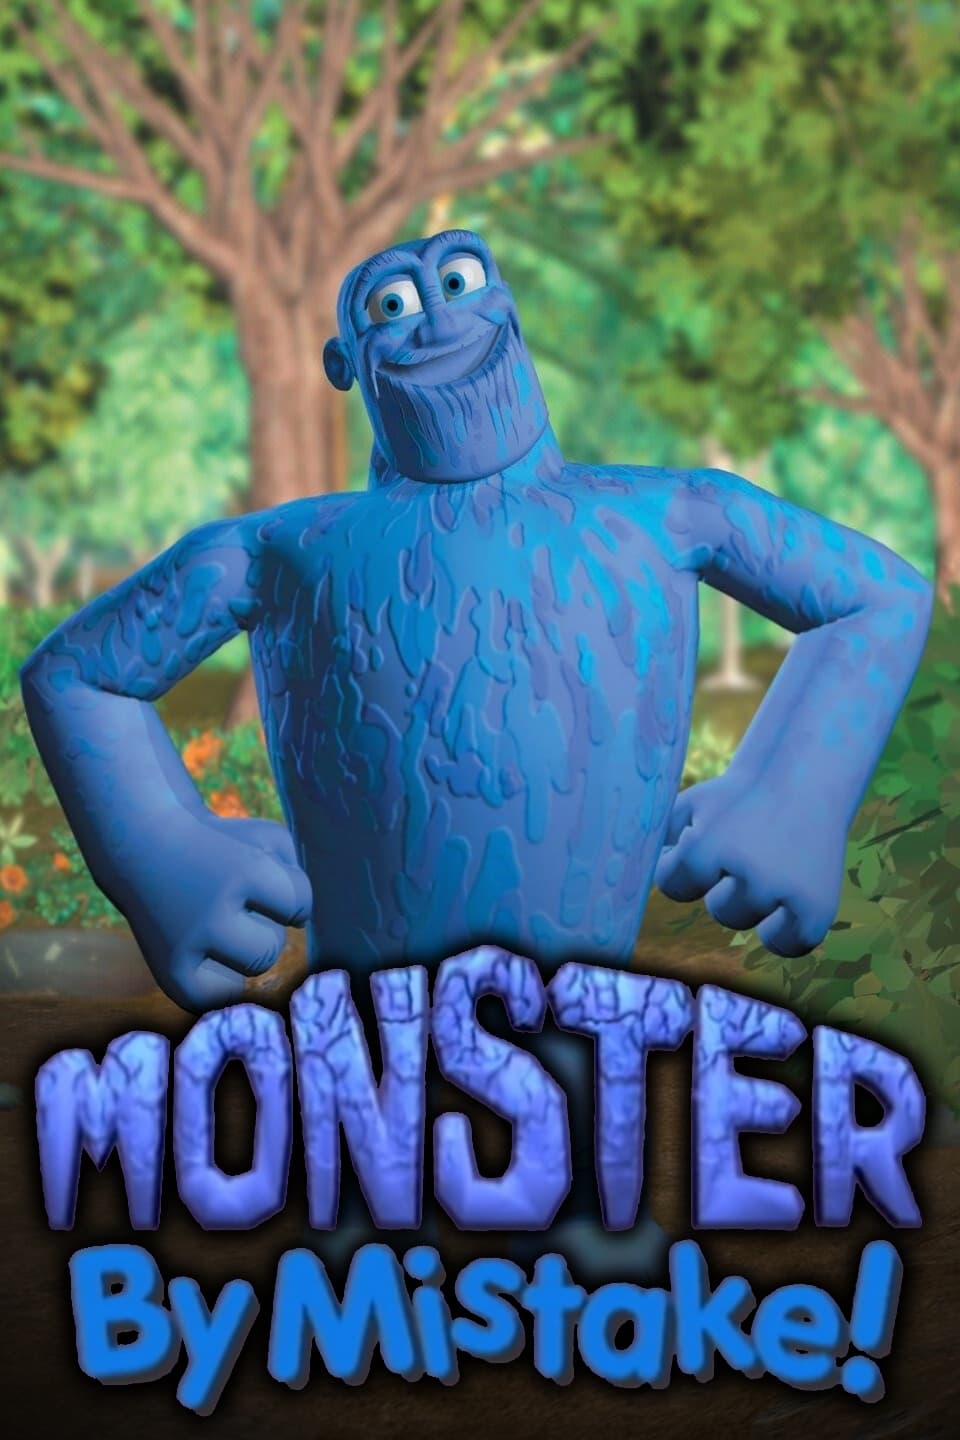 Monster by Mistake (1999)